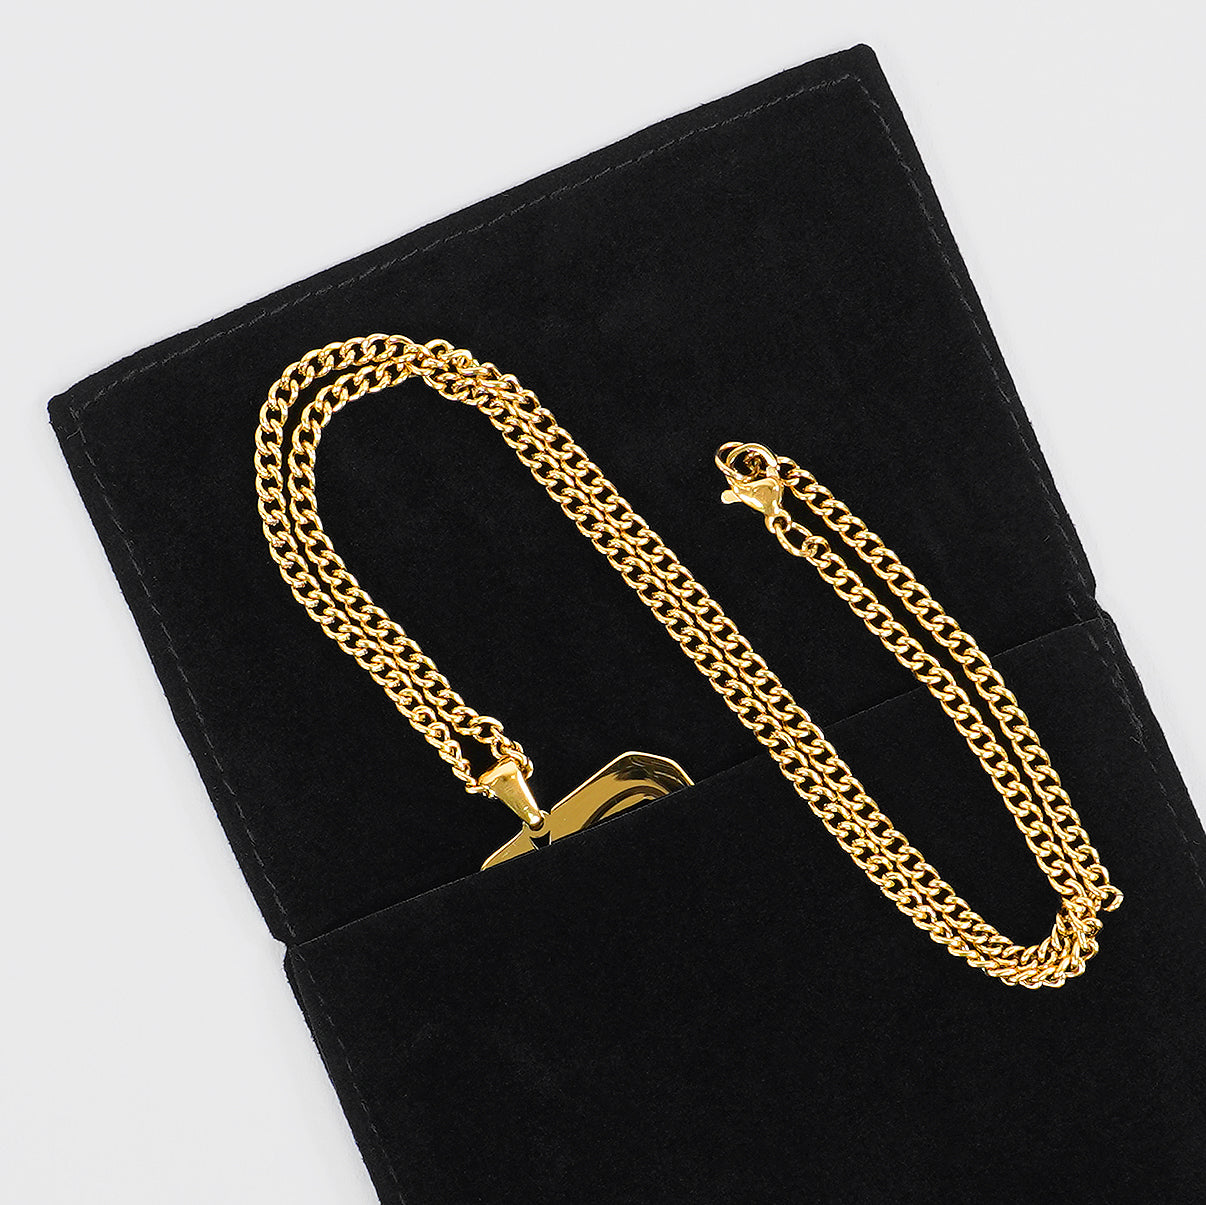 52 Number Pendant with Chain Necklace - Gold Plated Stainless Steel